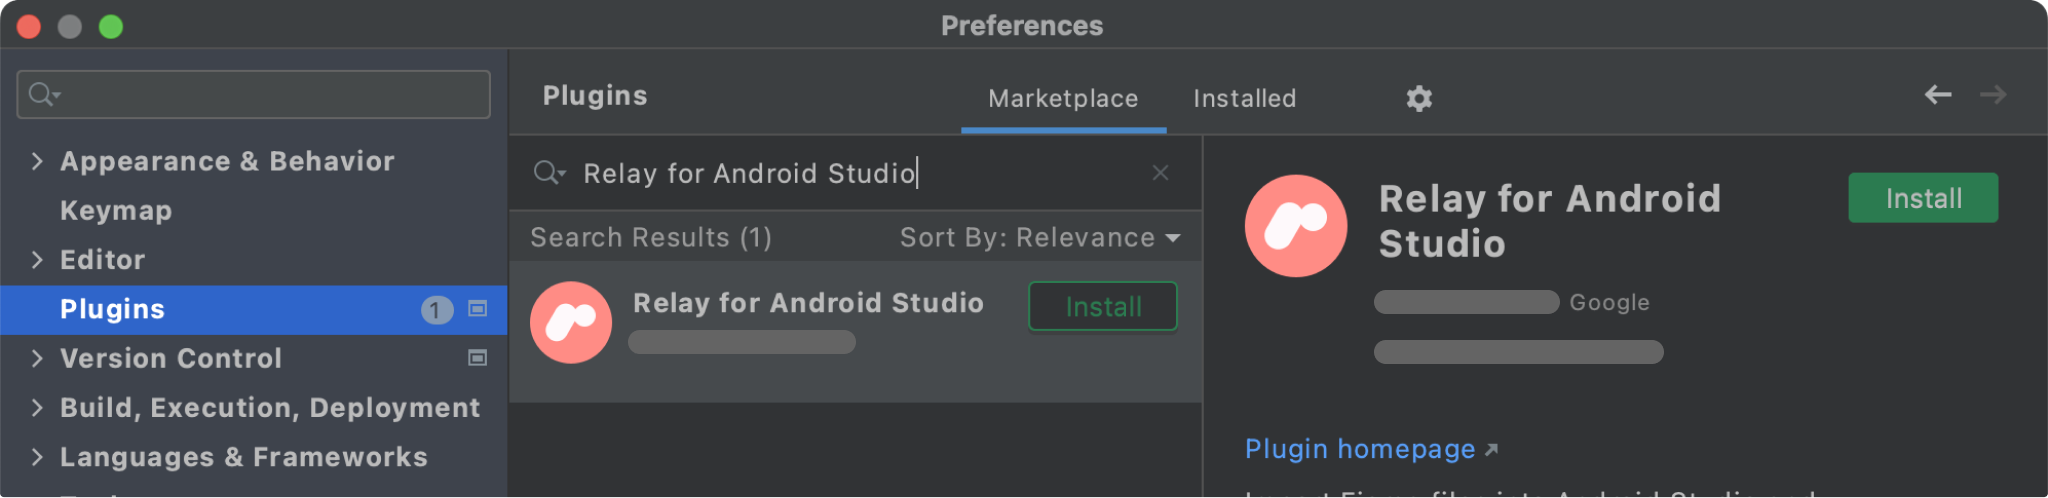 Relay for Android Studio en Marketplace